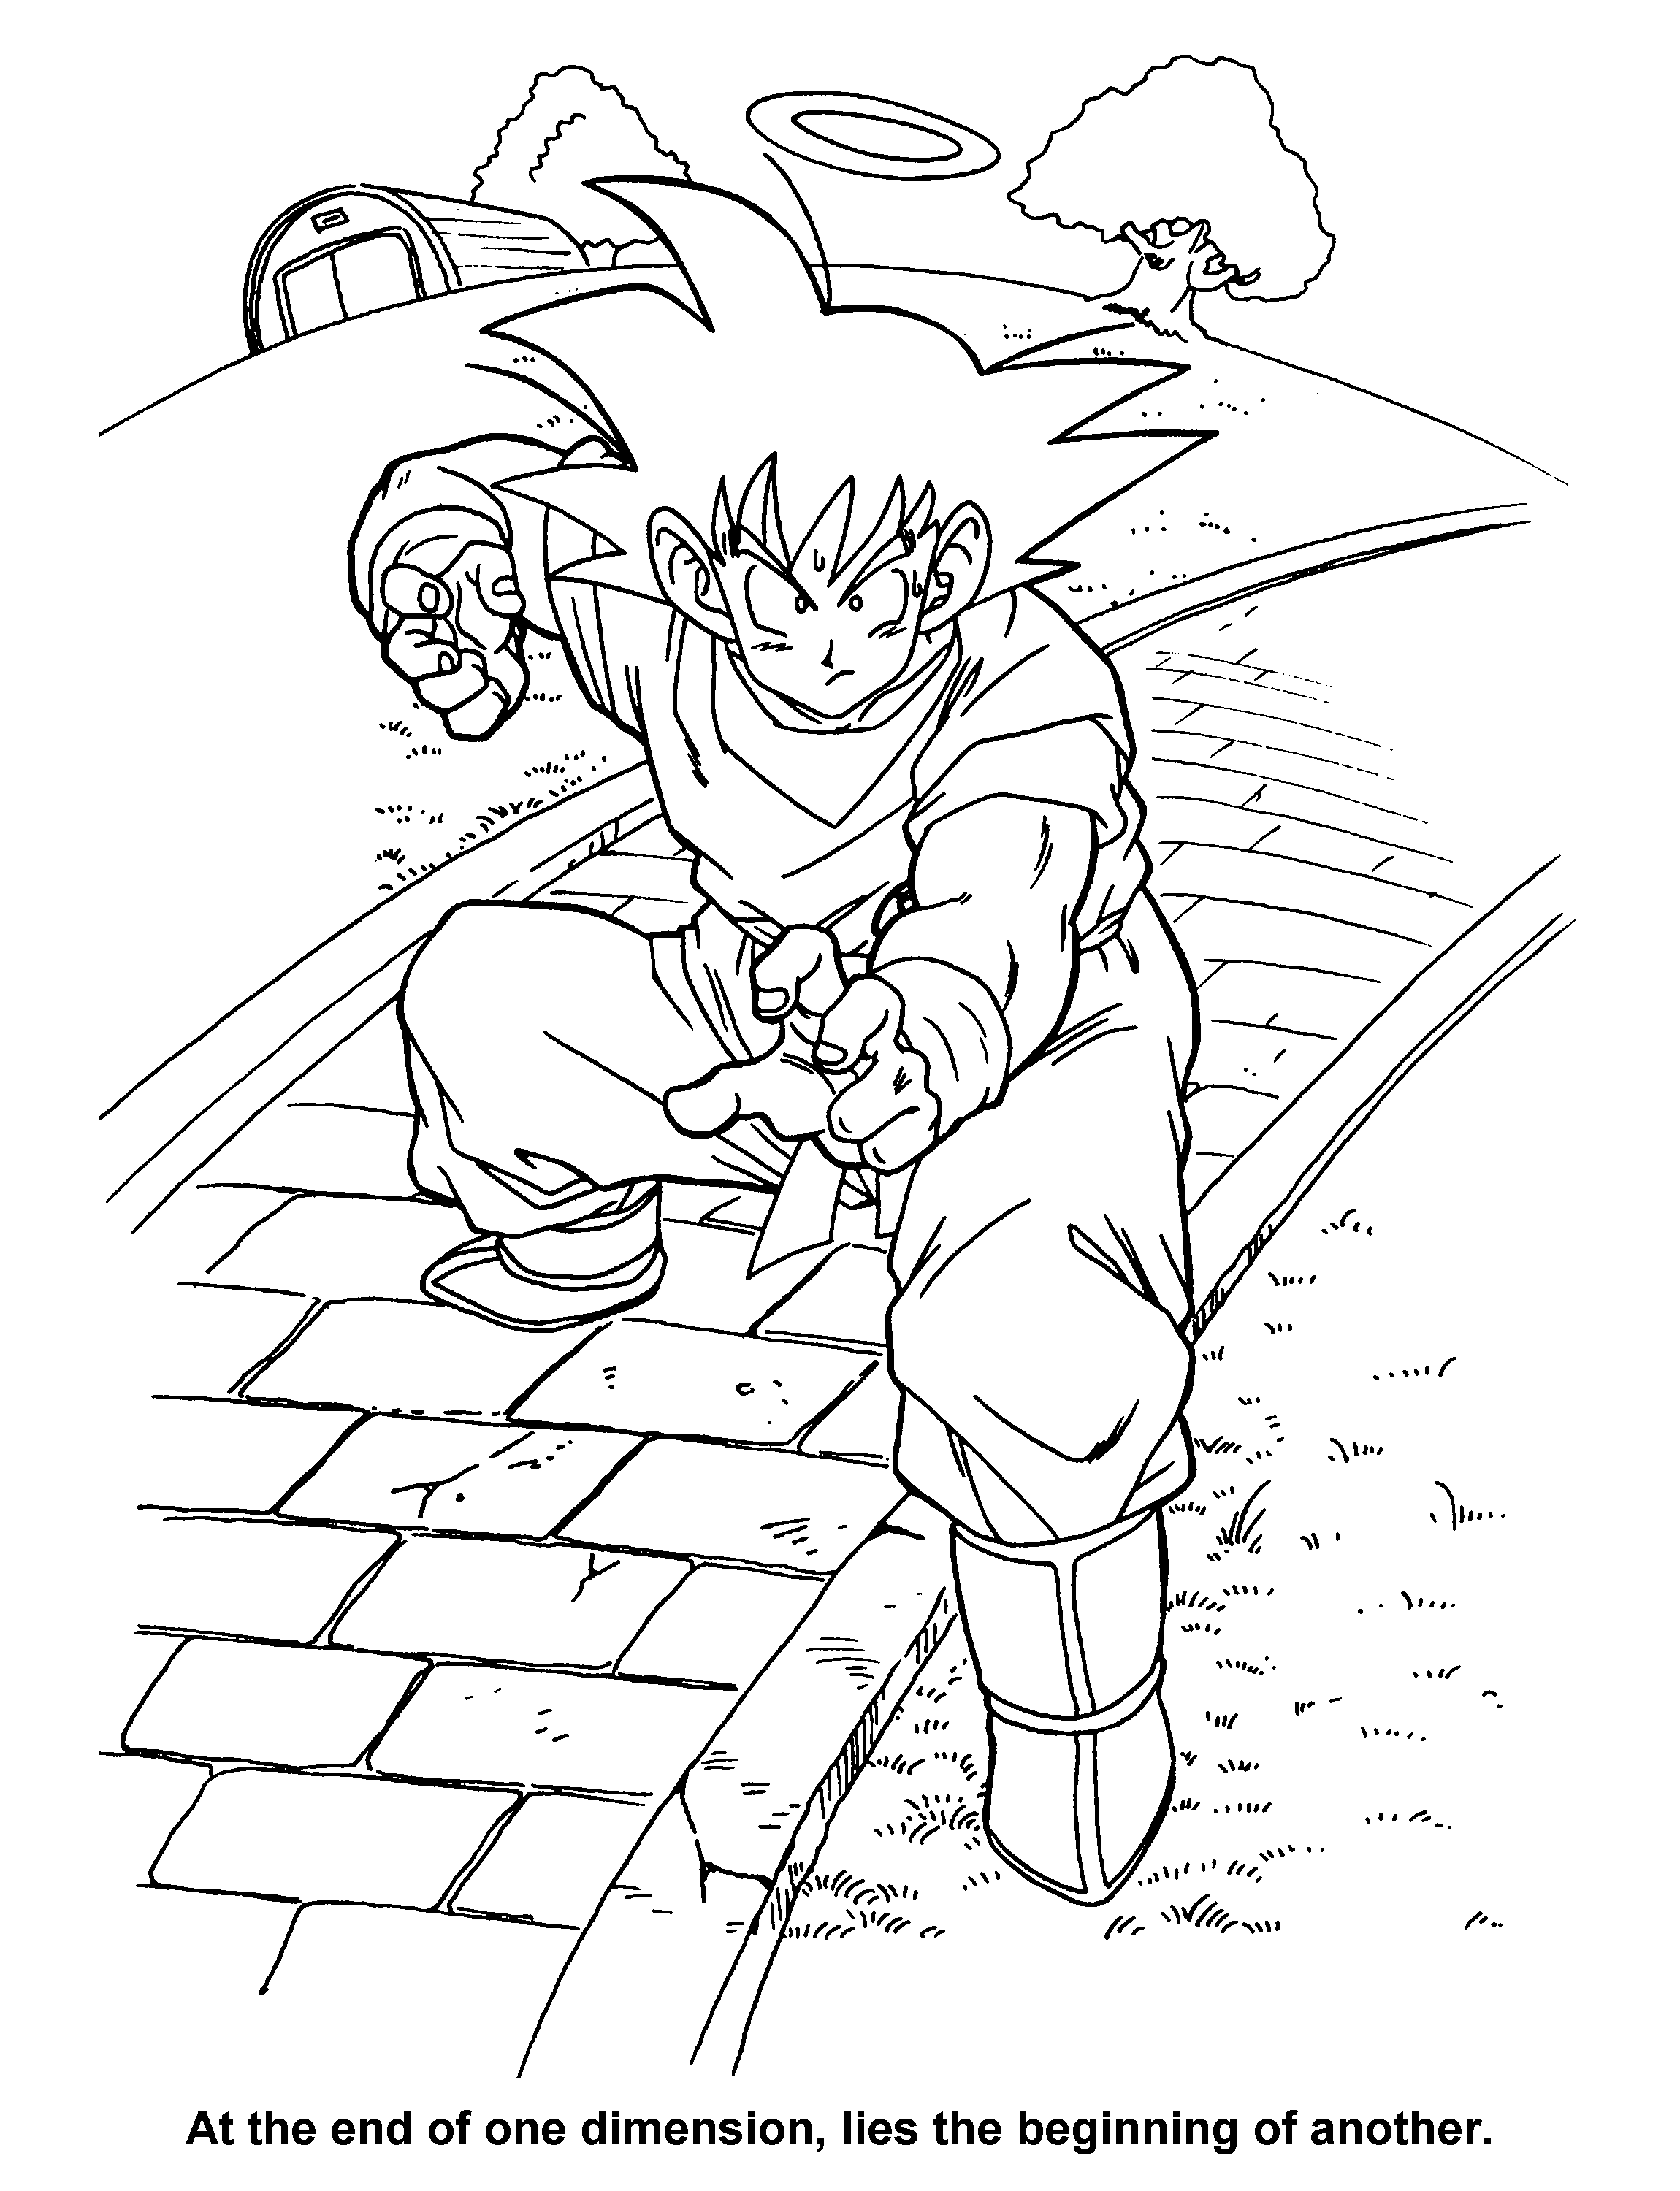 animated-coloring-pages-dragon-ball-z-image-0086